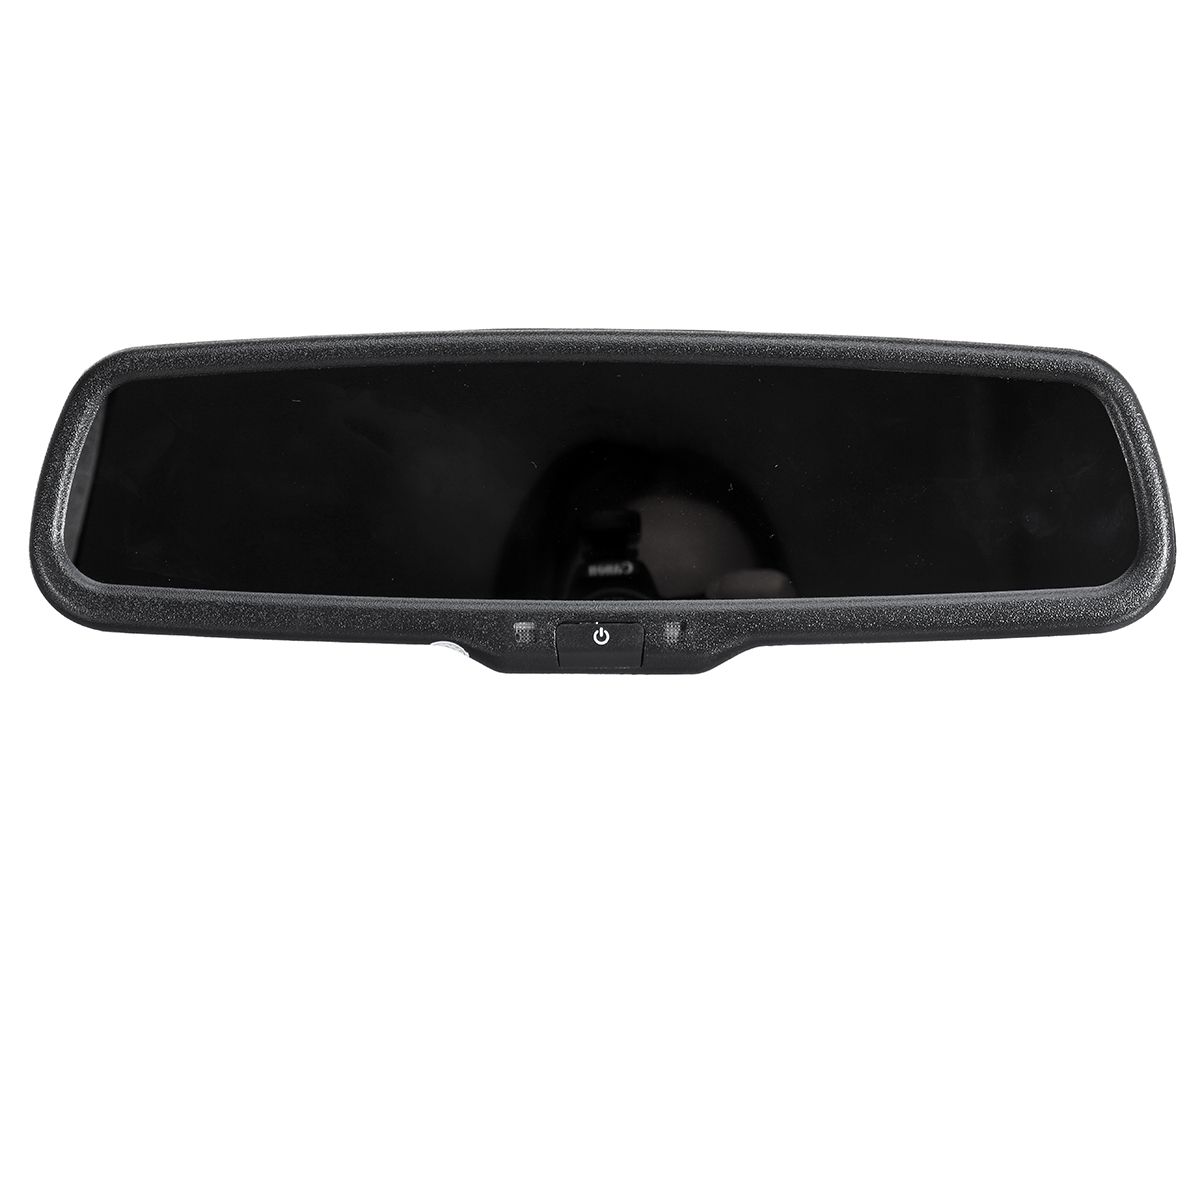 Master-Tailgaters-Car-Rear-View-Mirror-with-43quot-LCD-Screen--170deg-Backup-Camera-1629222